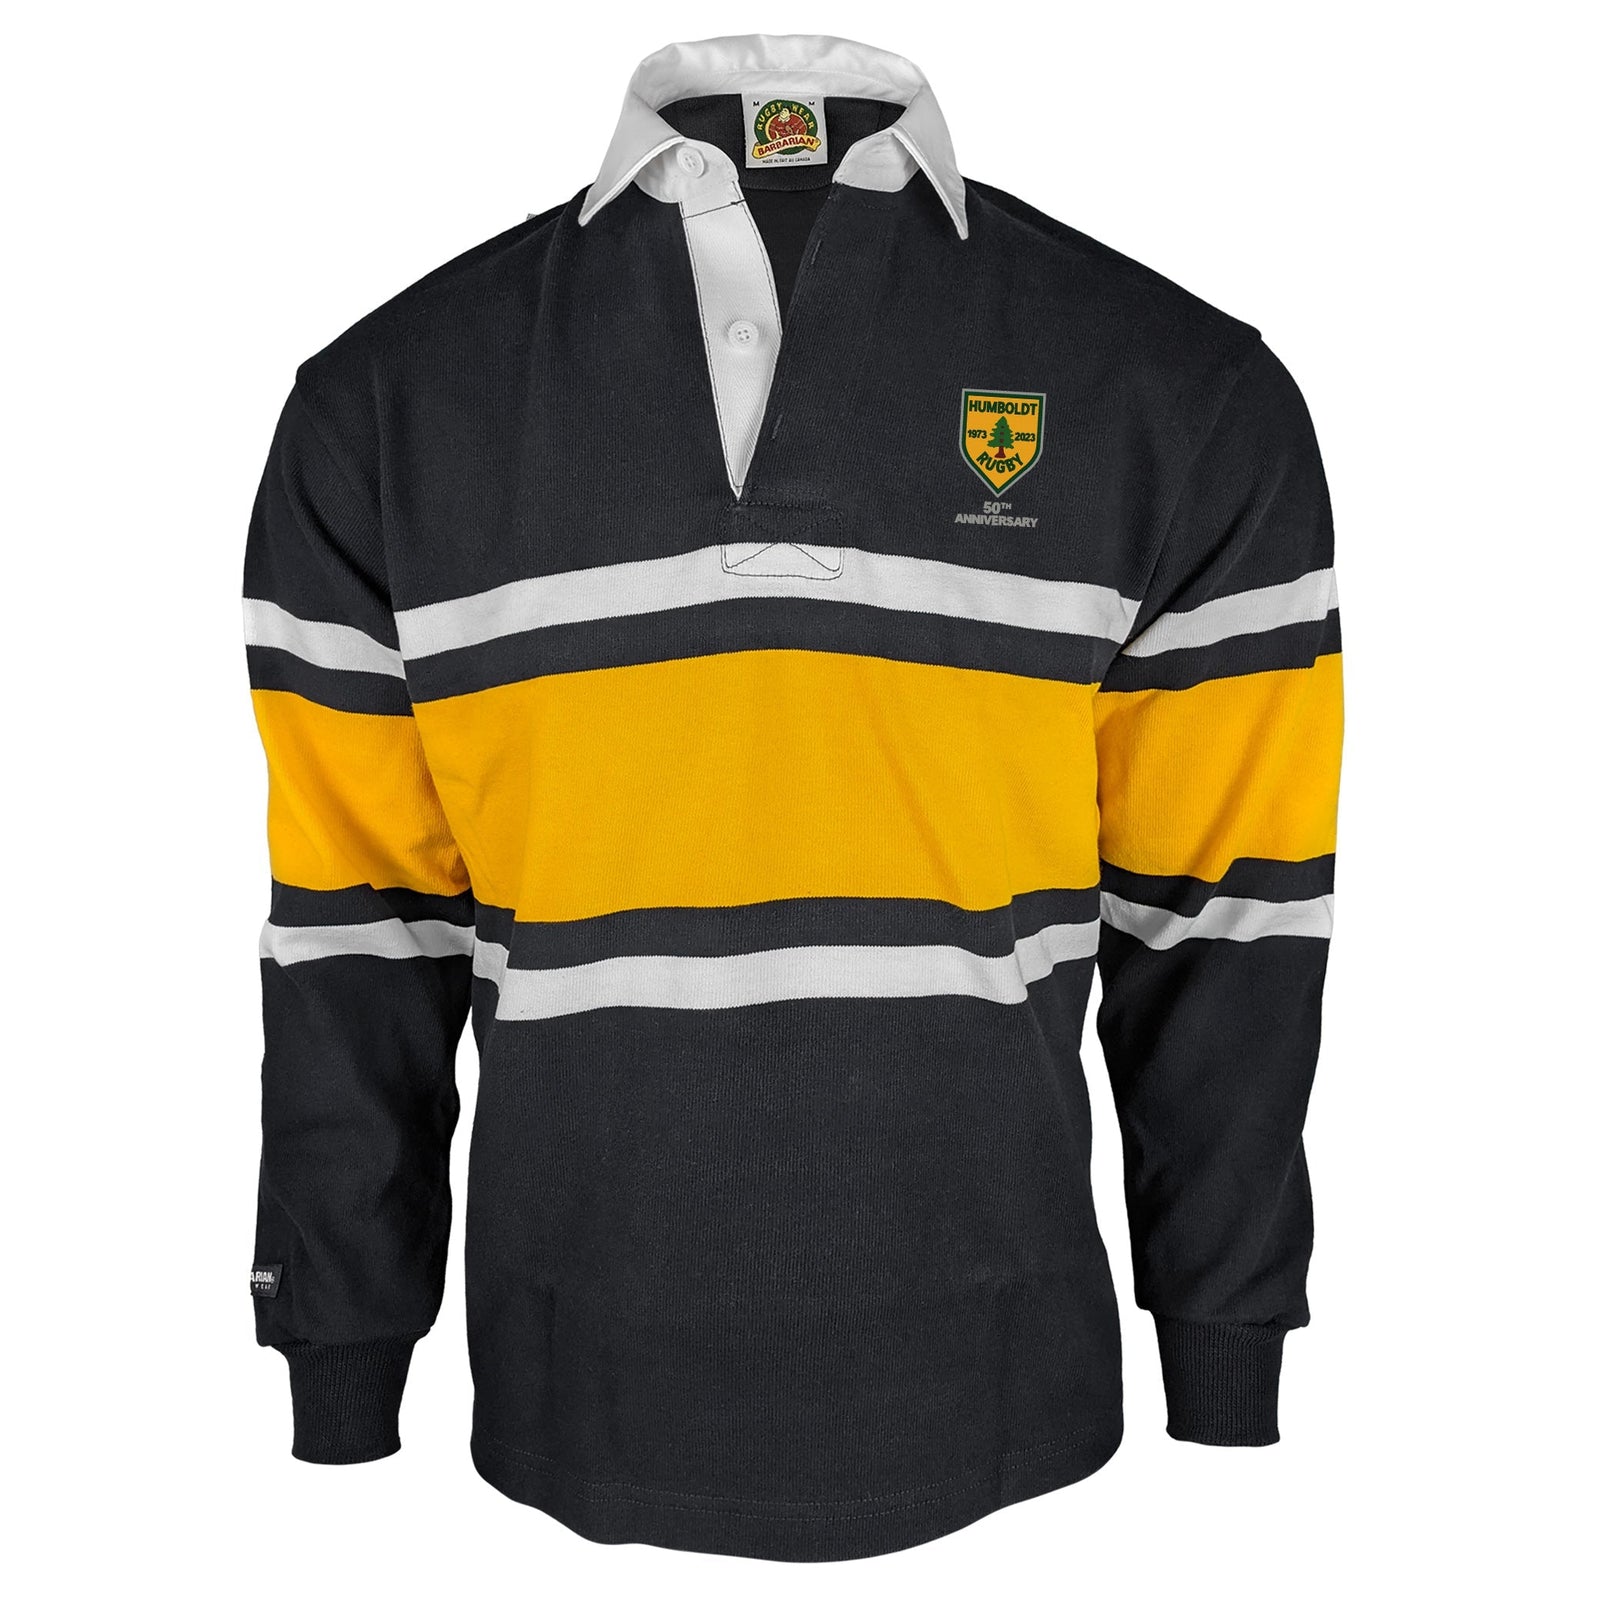 Custom Rugby Jerseys Design Your Own Rugby Jerseys Online